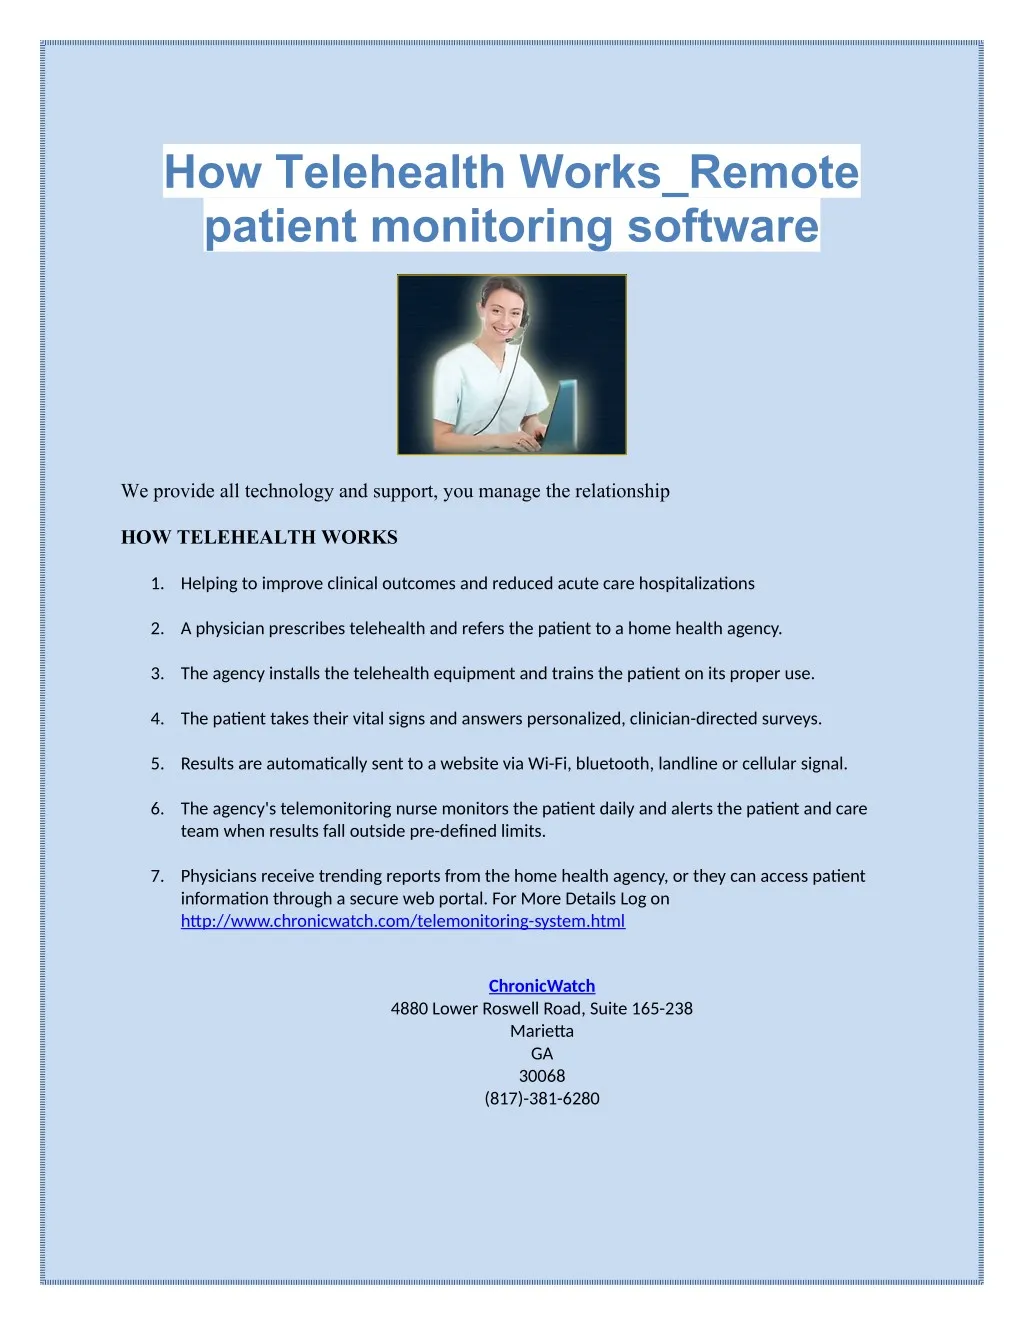 how telehealth works remote patient monitoring